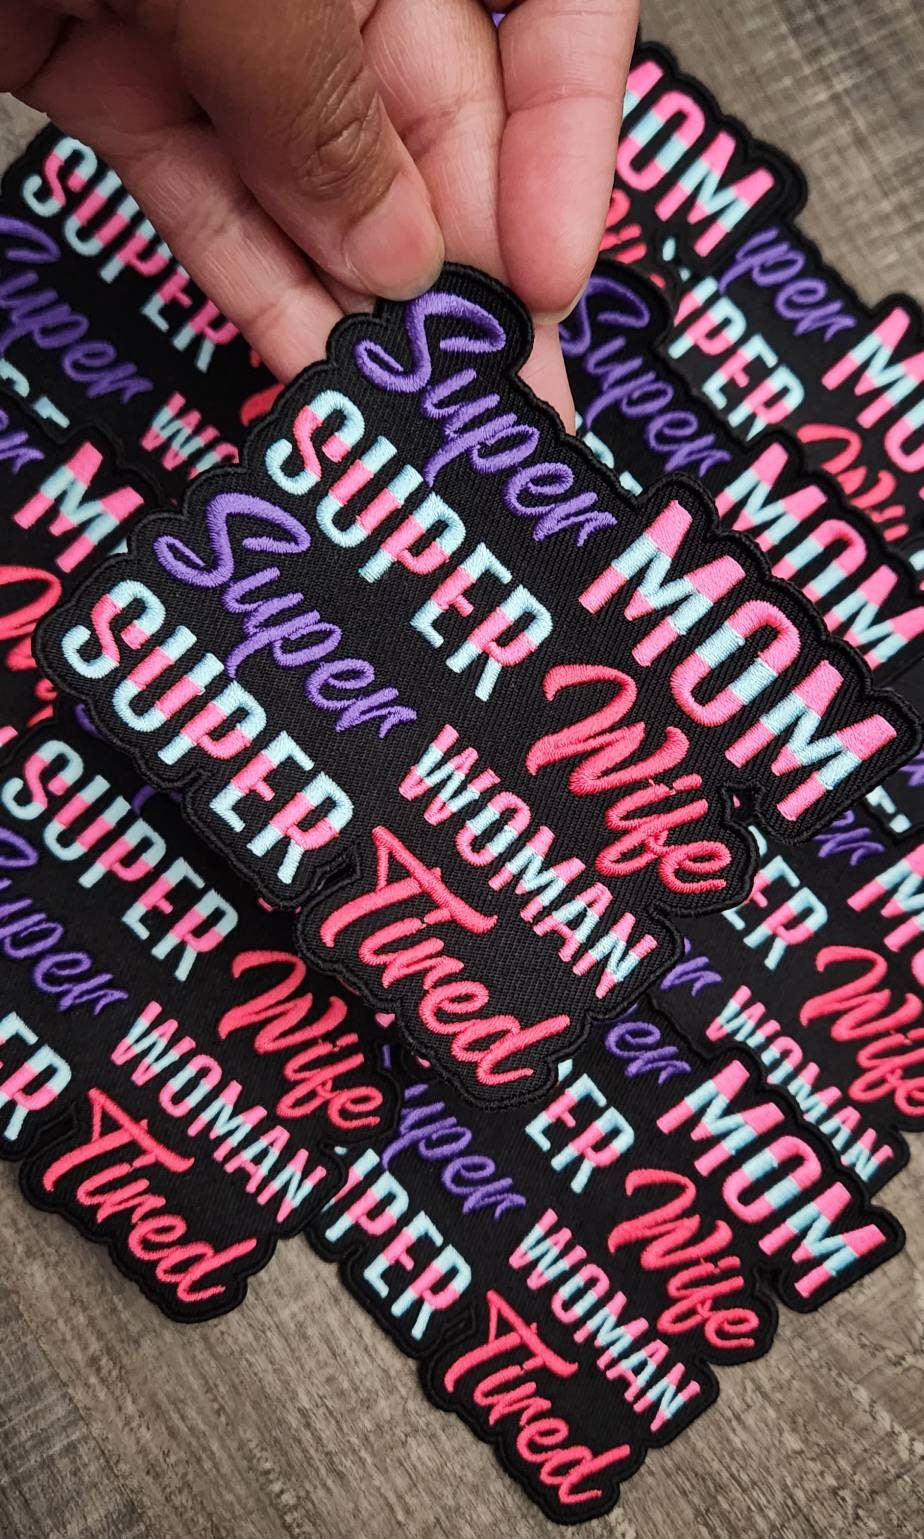 New, "Super Mom. Super Wife. Super Woman. Super Tired" Mom Patch, Size 4"x4" Iron-on Embroidered Patch, Patches for Jackets, Gift for Mom